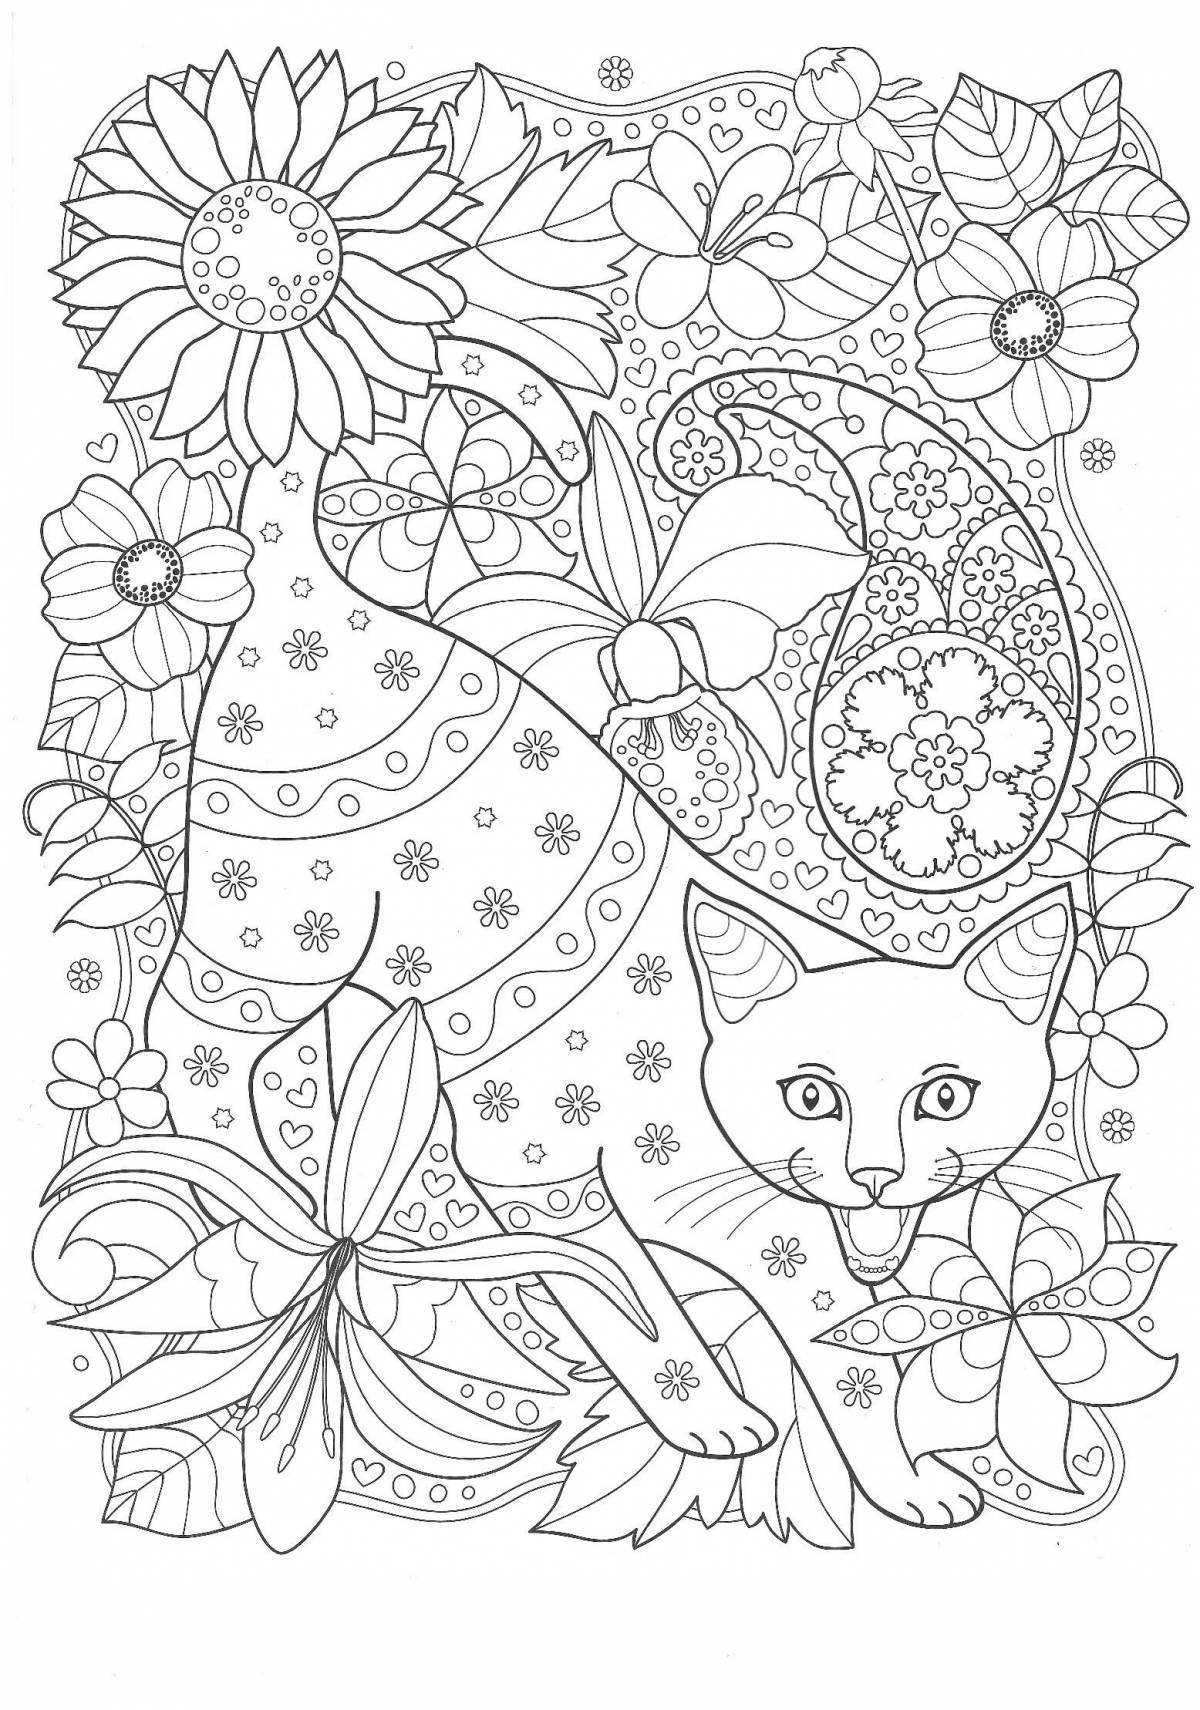 Coloring book mandala with a bewitching cat